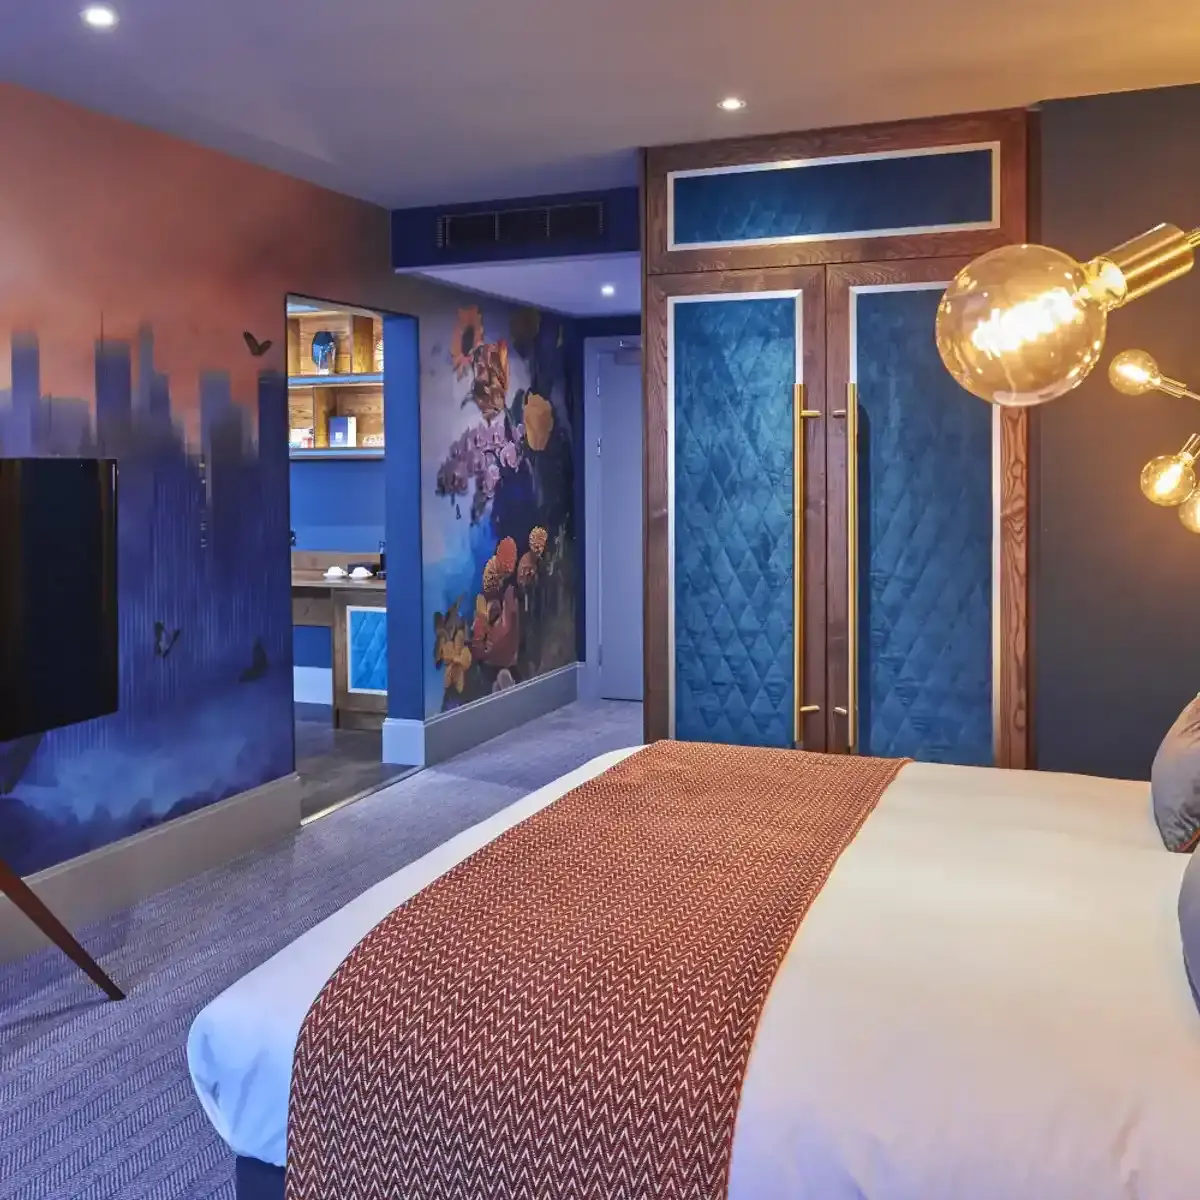 A hotel suite with a bed, wardrobe, and blue decor